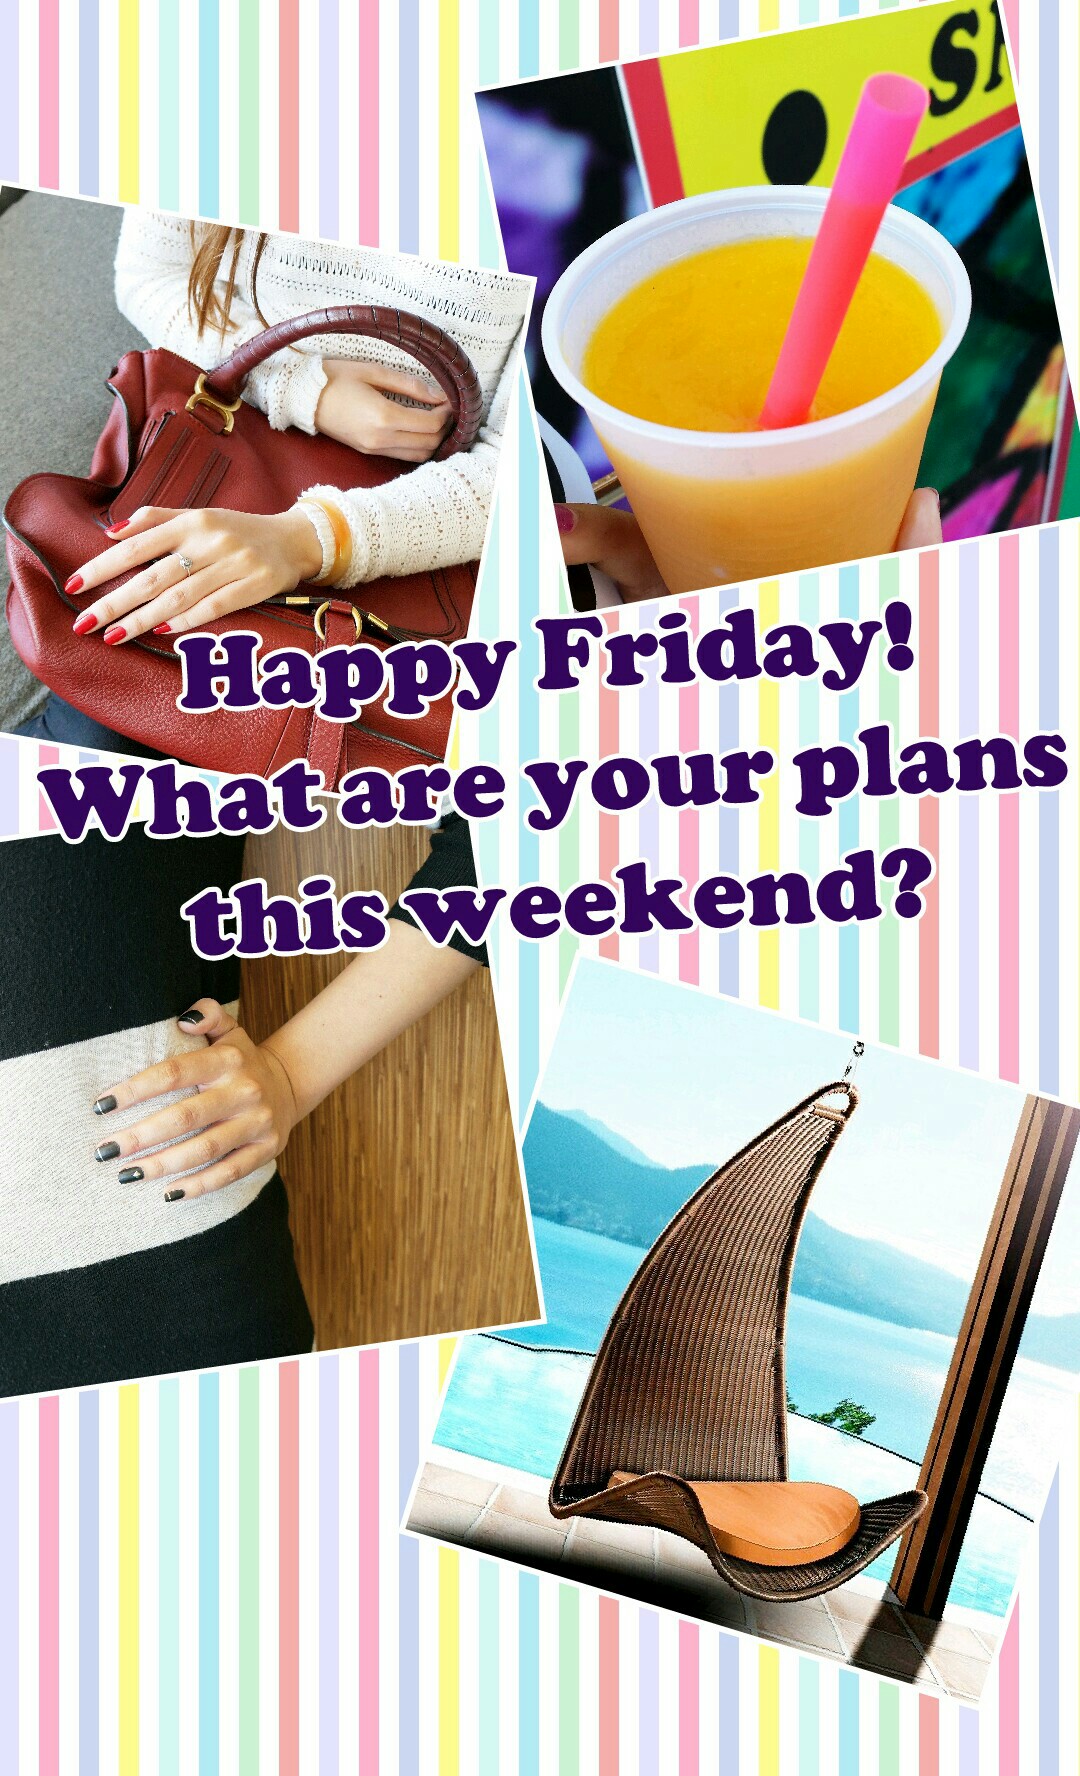 Happy Friday!
What are your plans
this weekend?